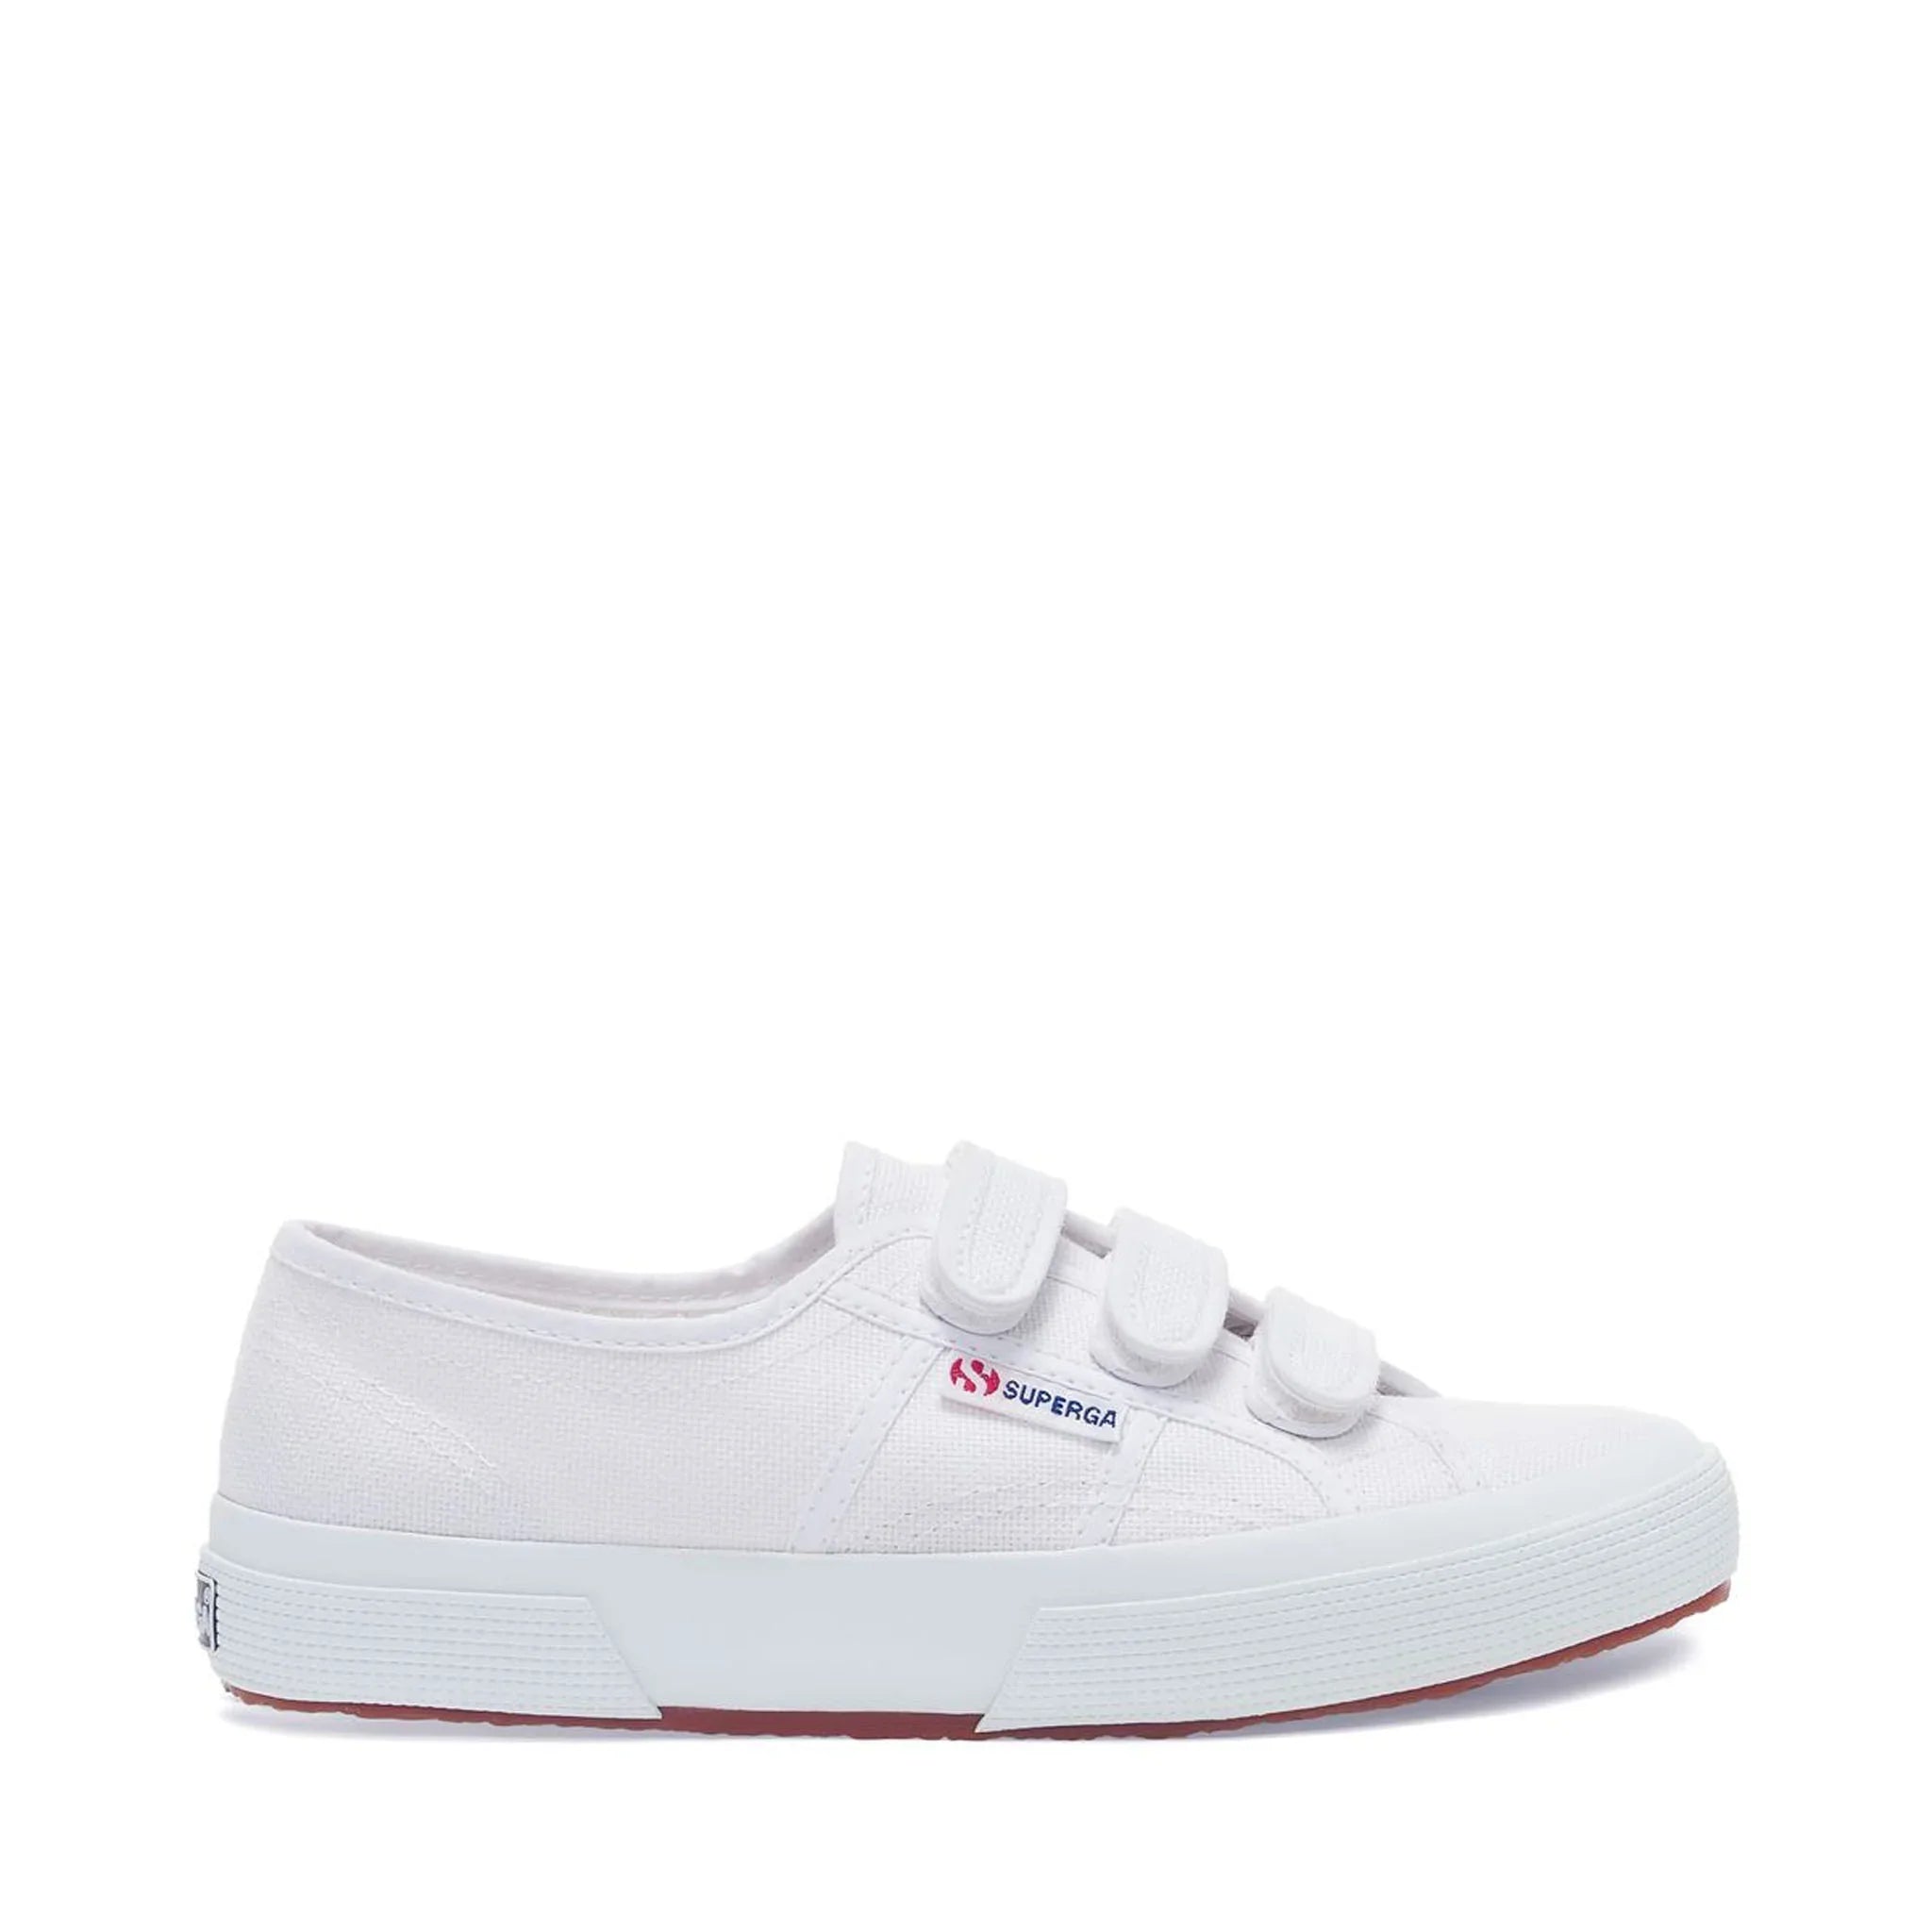 Superga 2750 Cot3Strapu Sneakers - White. Side view.